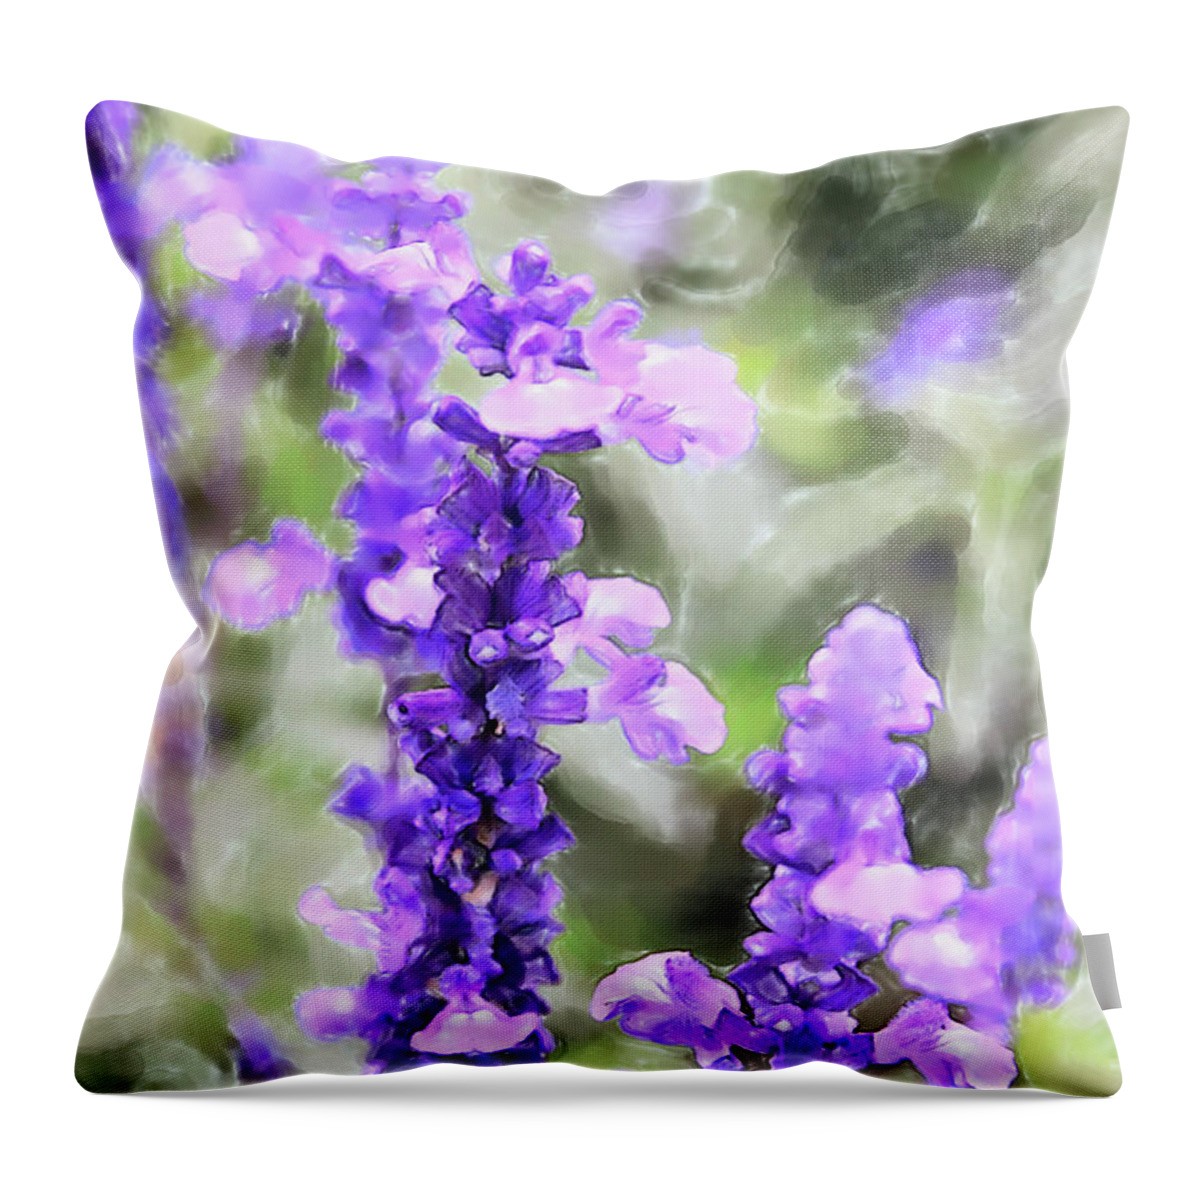 China Throw Pillow featuring the digital art Sage Flowers Watercolor by Tanya Owens